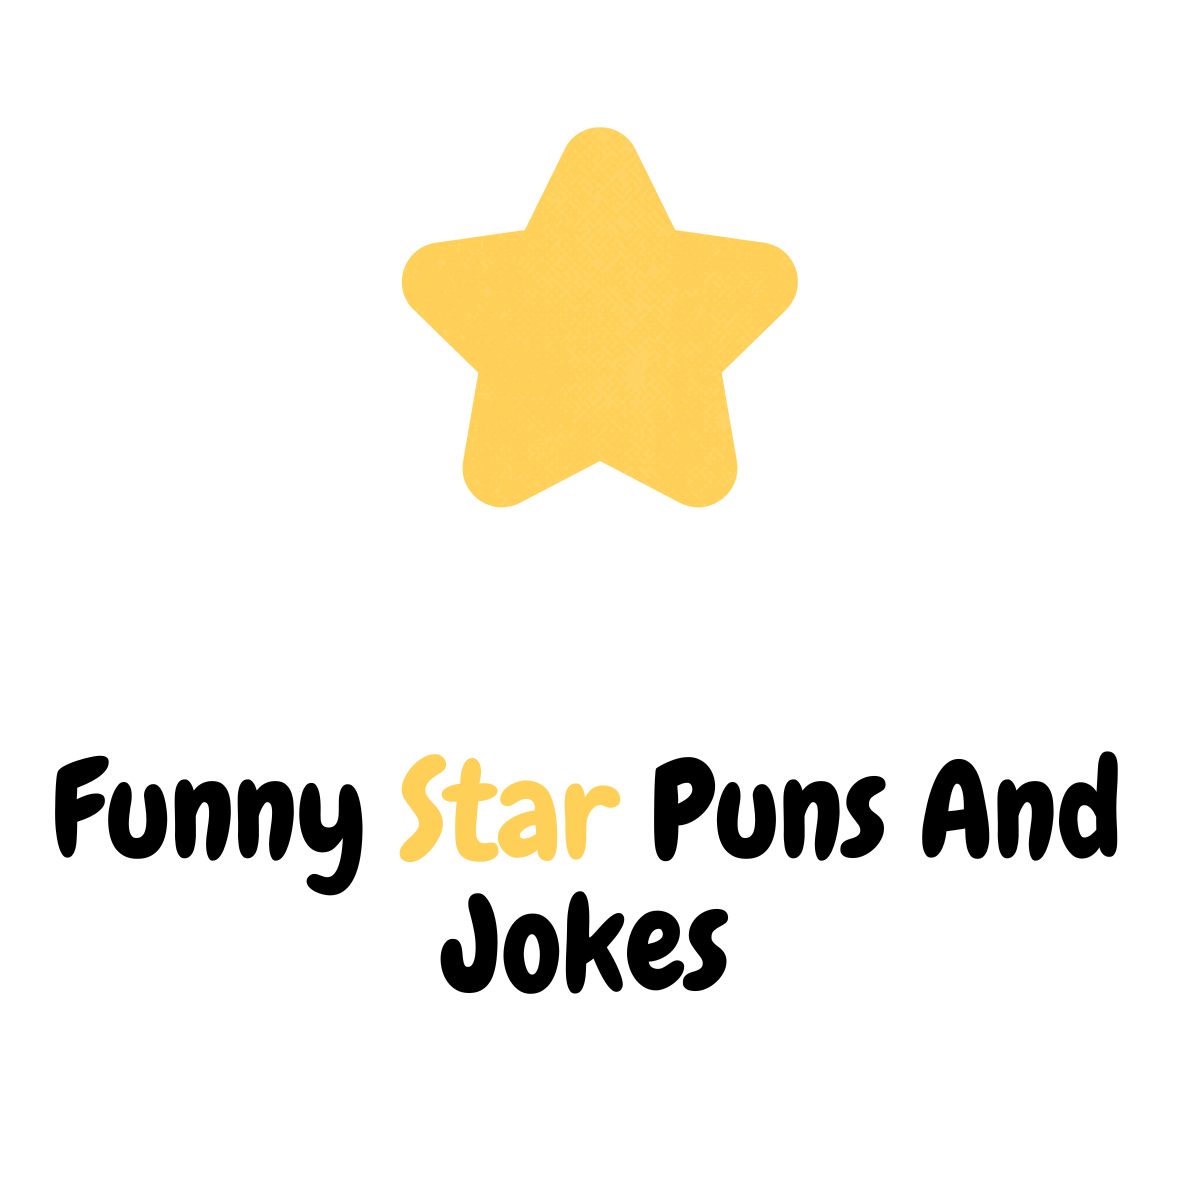 100+ Funny Star Puns And Jokes That Are Light-Years of Laughter